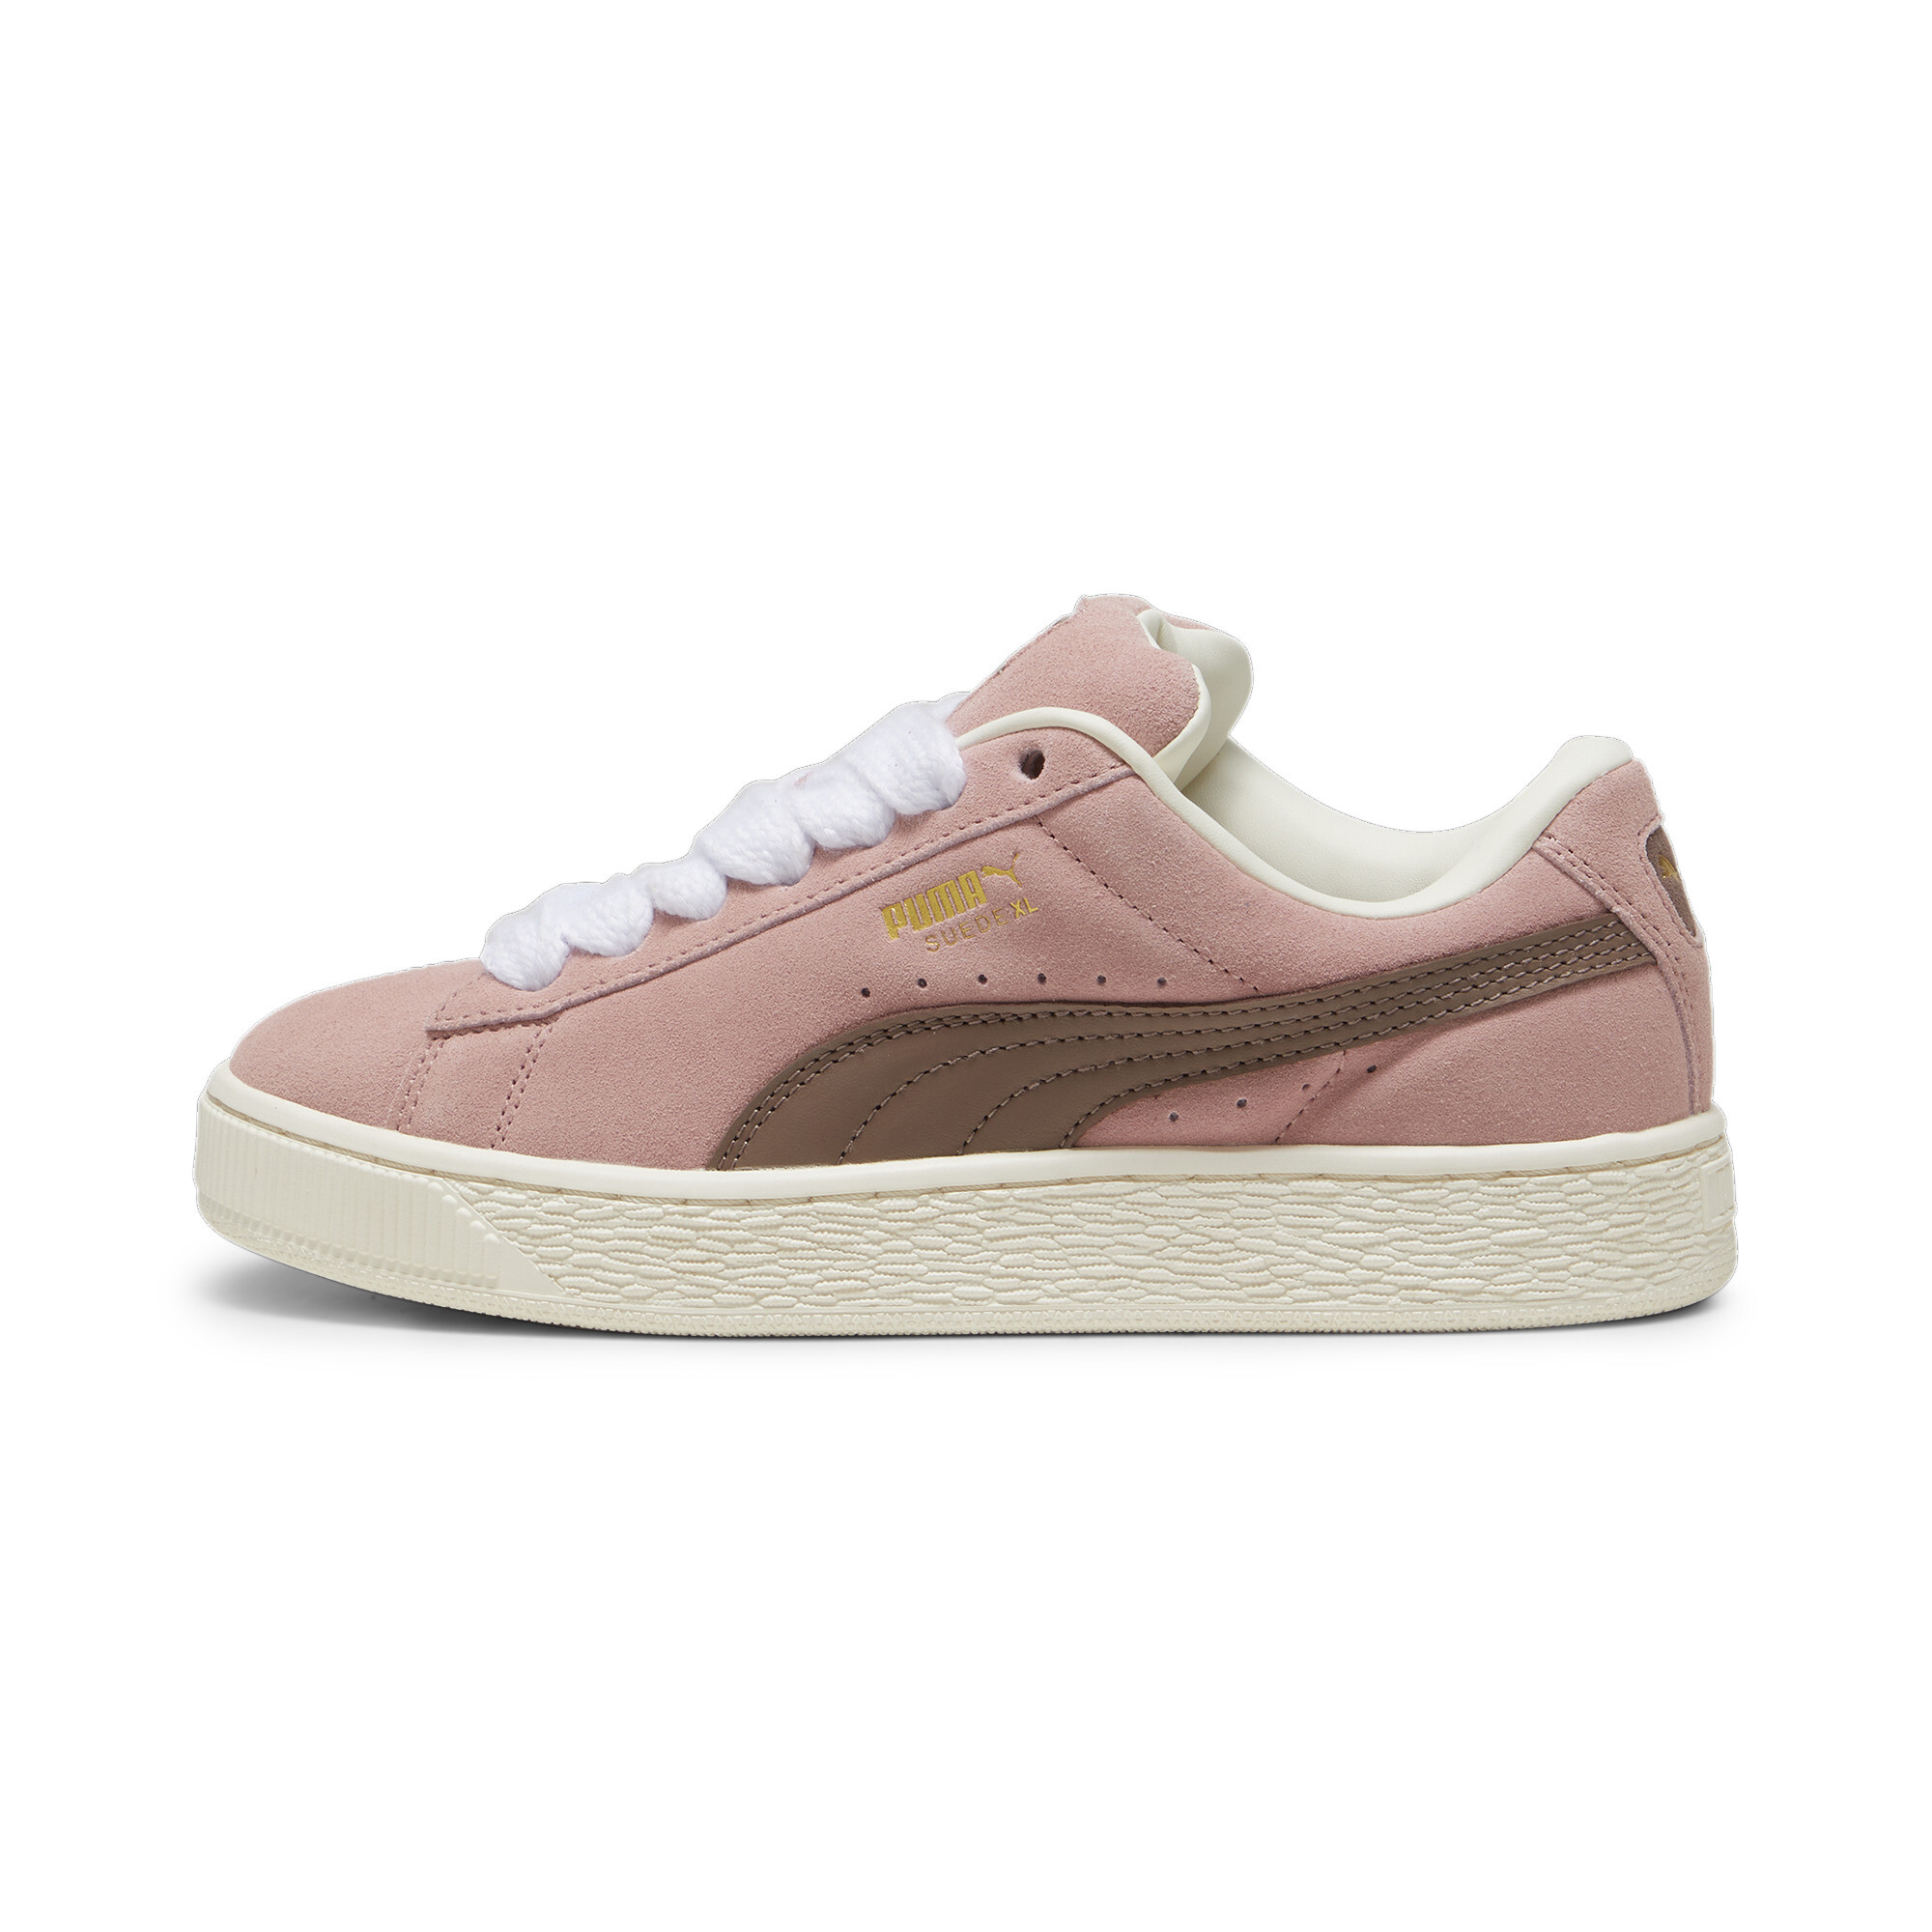 Puma Suede XL Sneakers Unisex, Pink, Size 43, Shoes